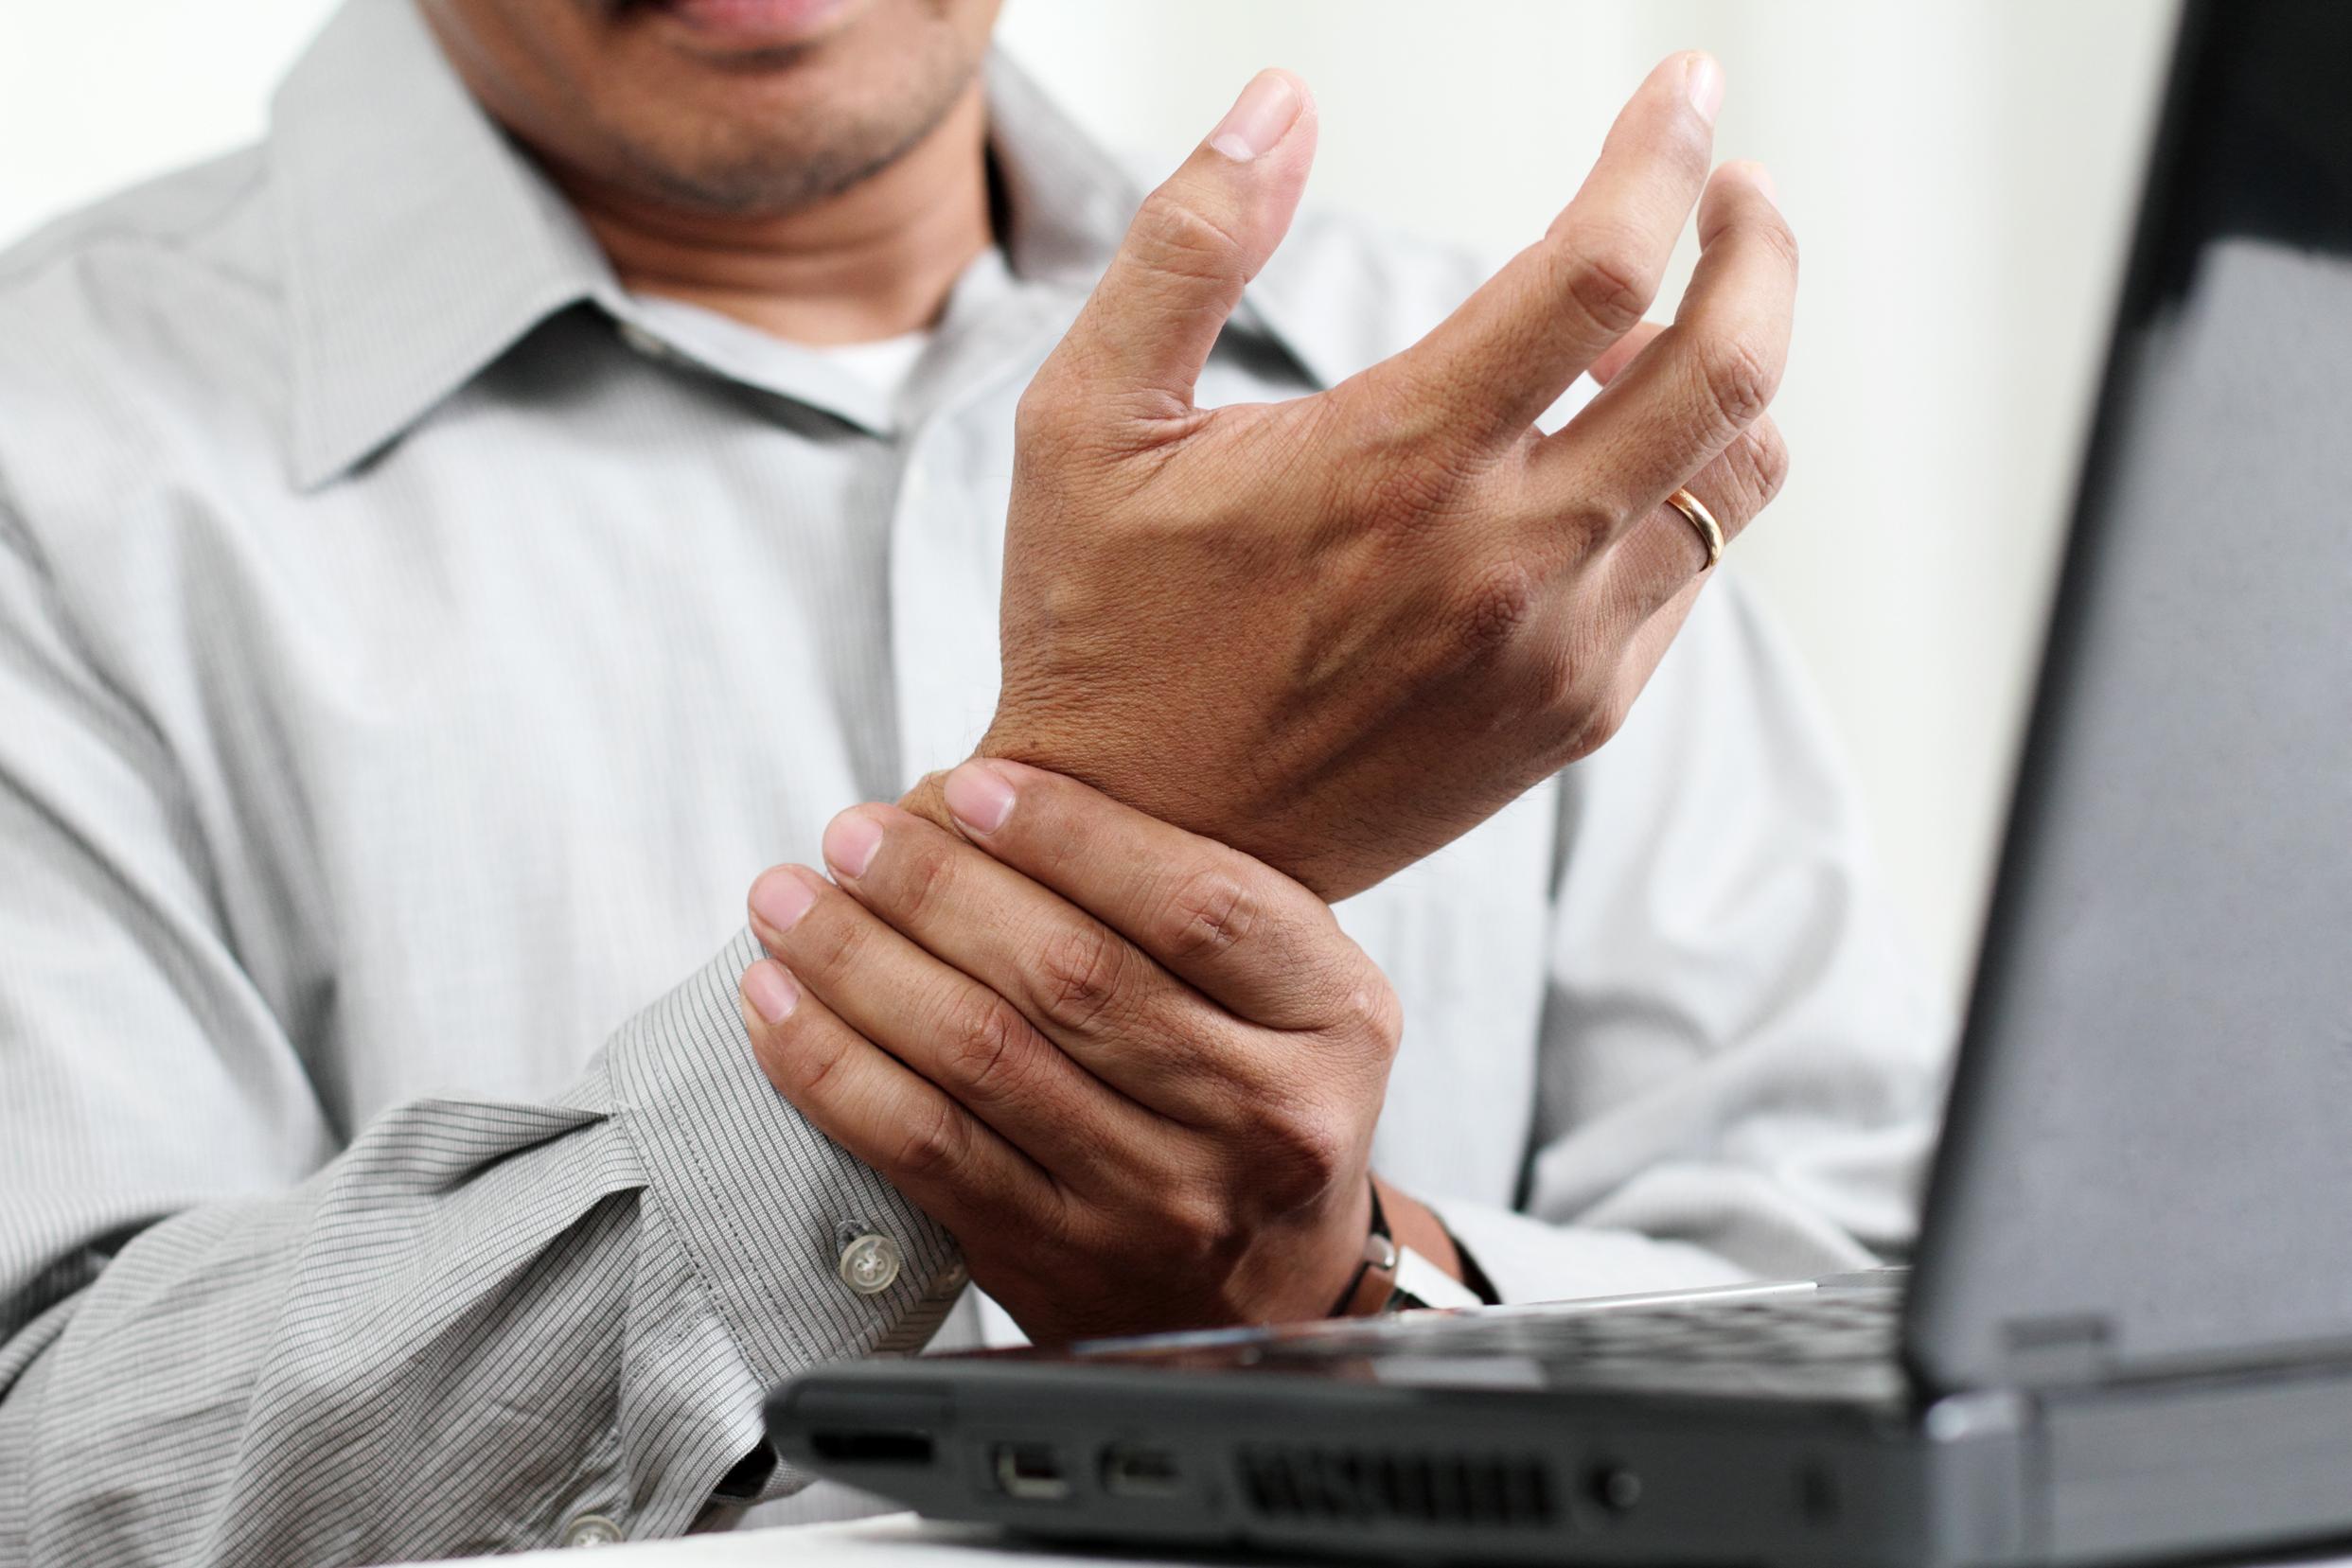 Everything You Need To Know About Carpal Tunnel Syndrome — Sarrica